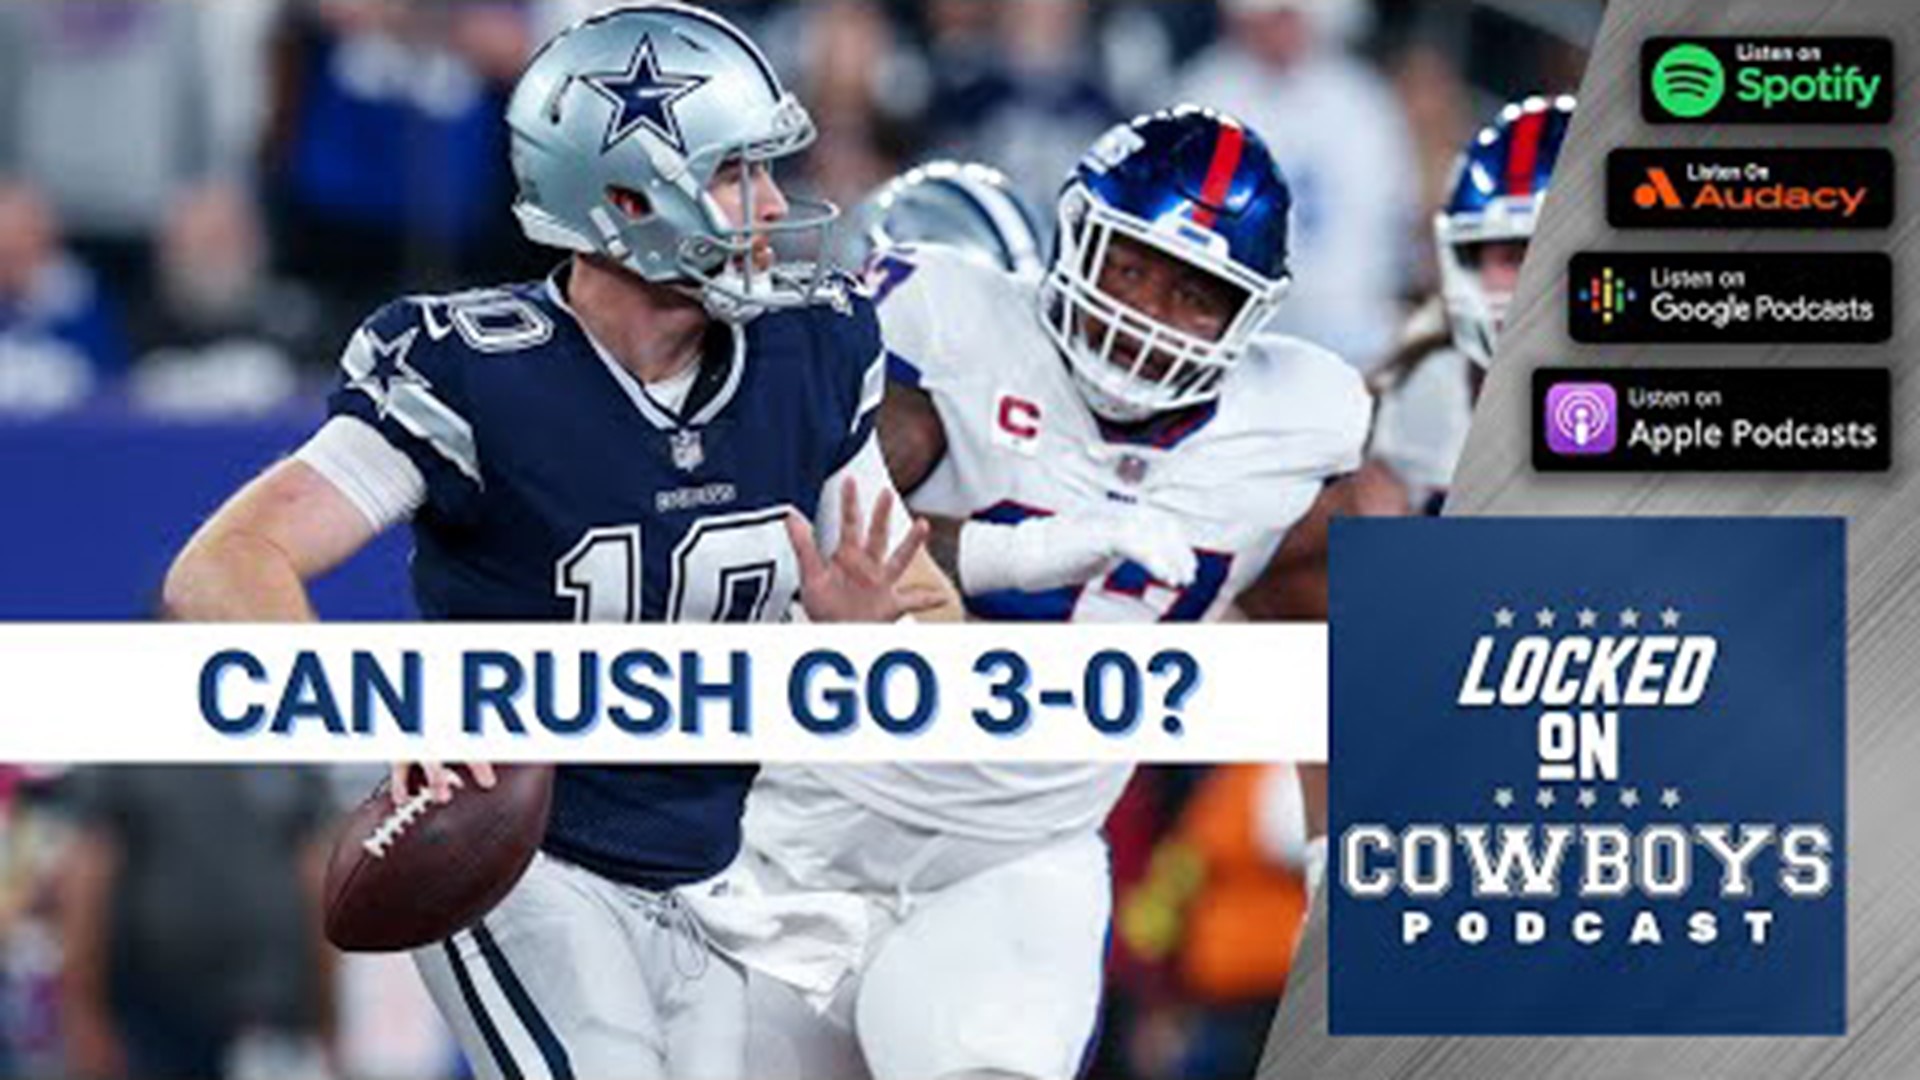 Marcus Mosher of Locked On Cowboys is joined by David Harrison of Locked On Commanders to preview the Week 4 matchup between Dallas and Washington.